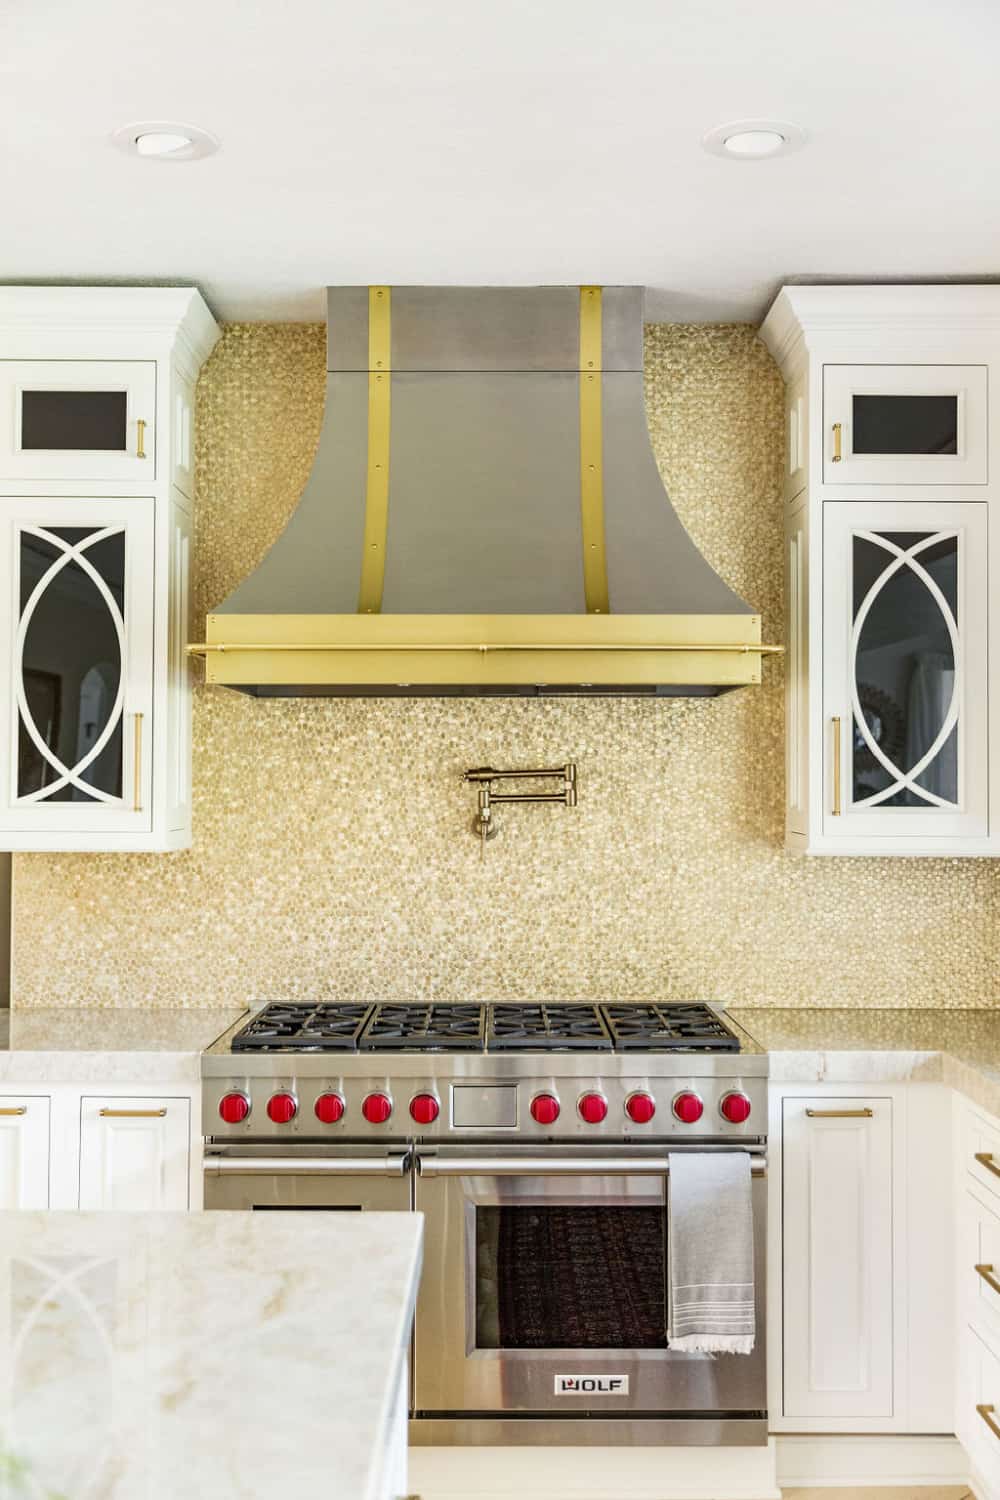 Nicholas Design Build | Remodel of a kitchen with white cabinets and a gold stove hood.